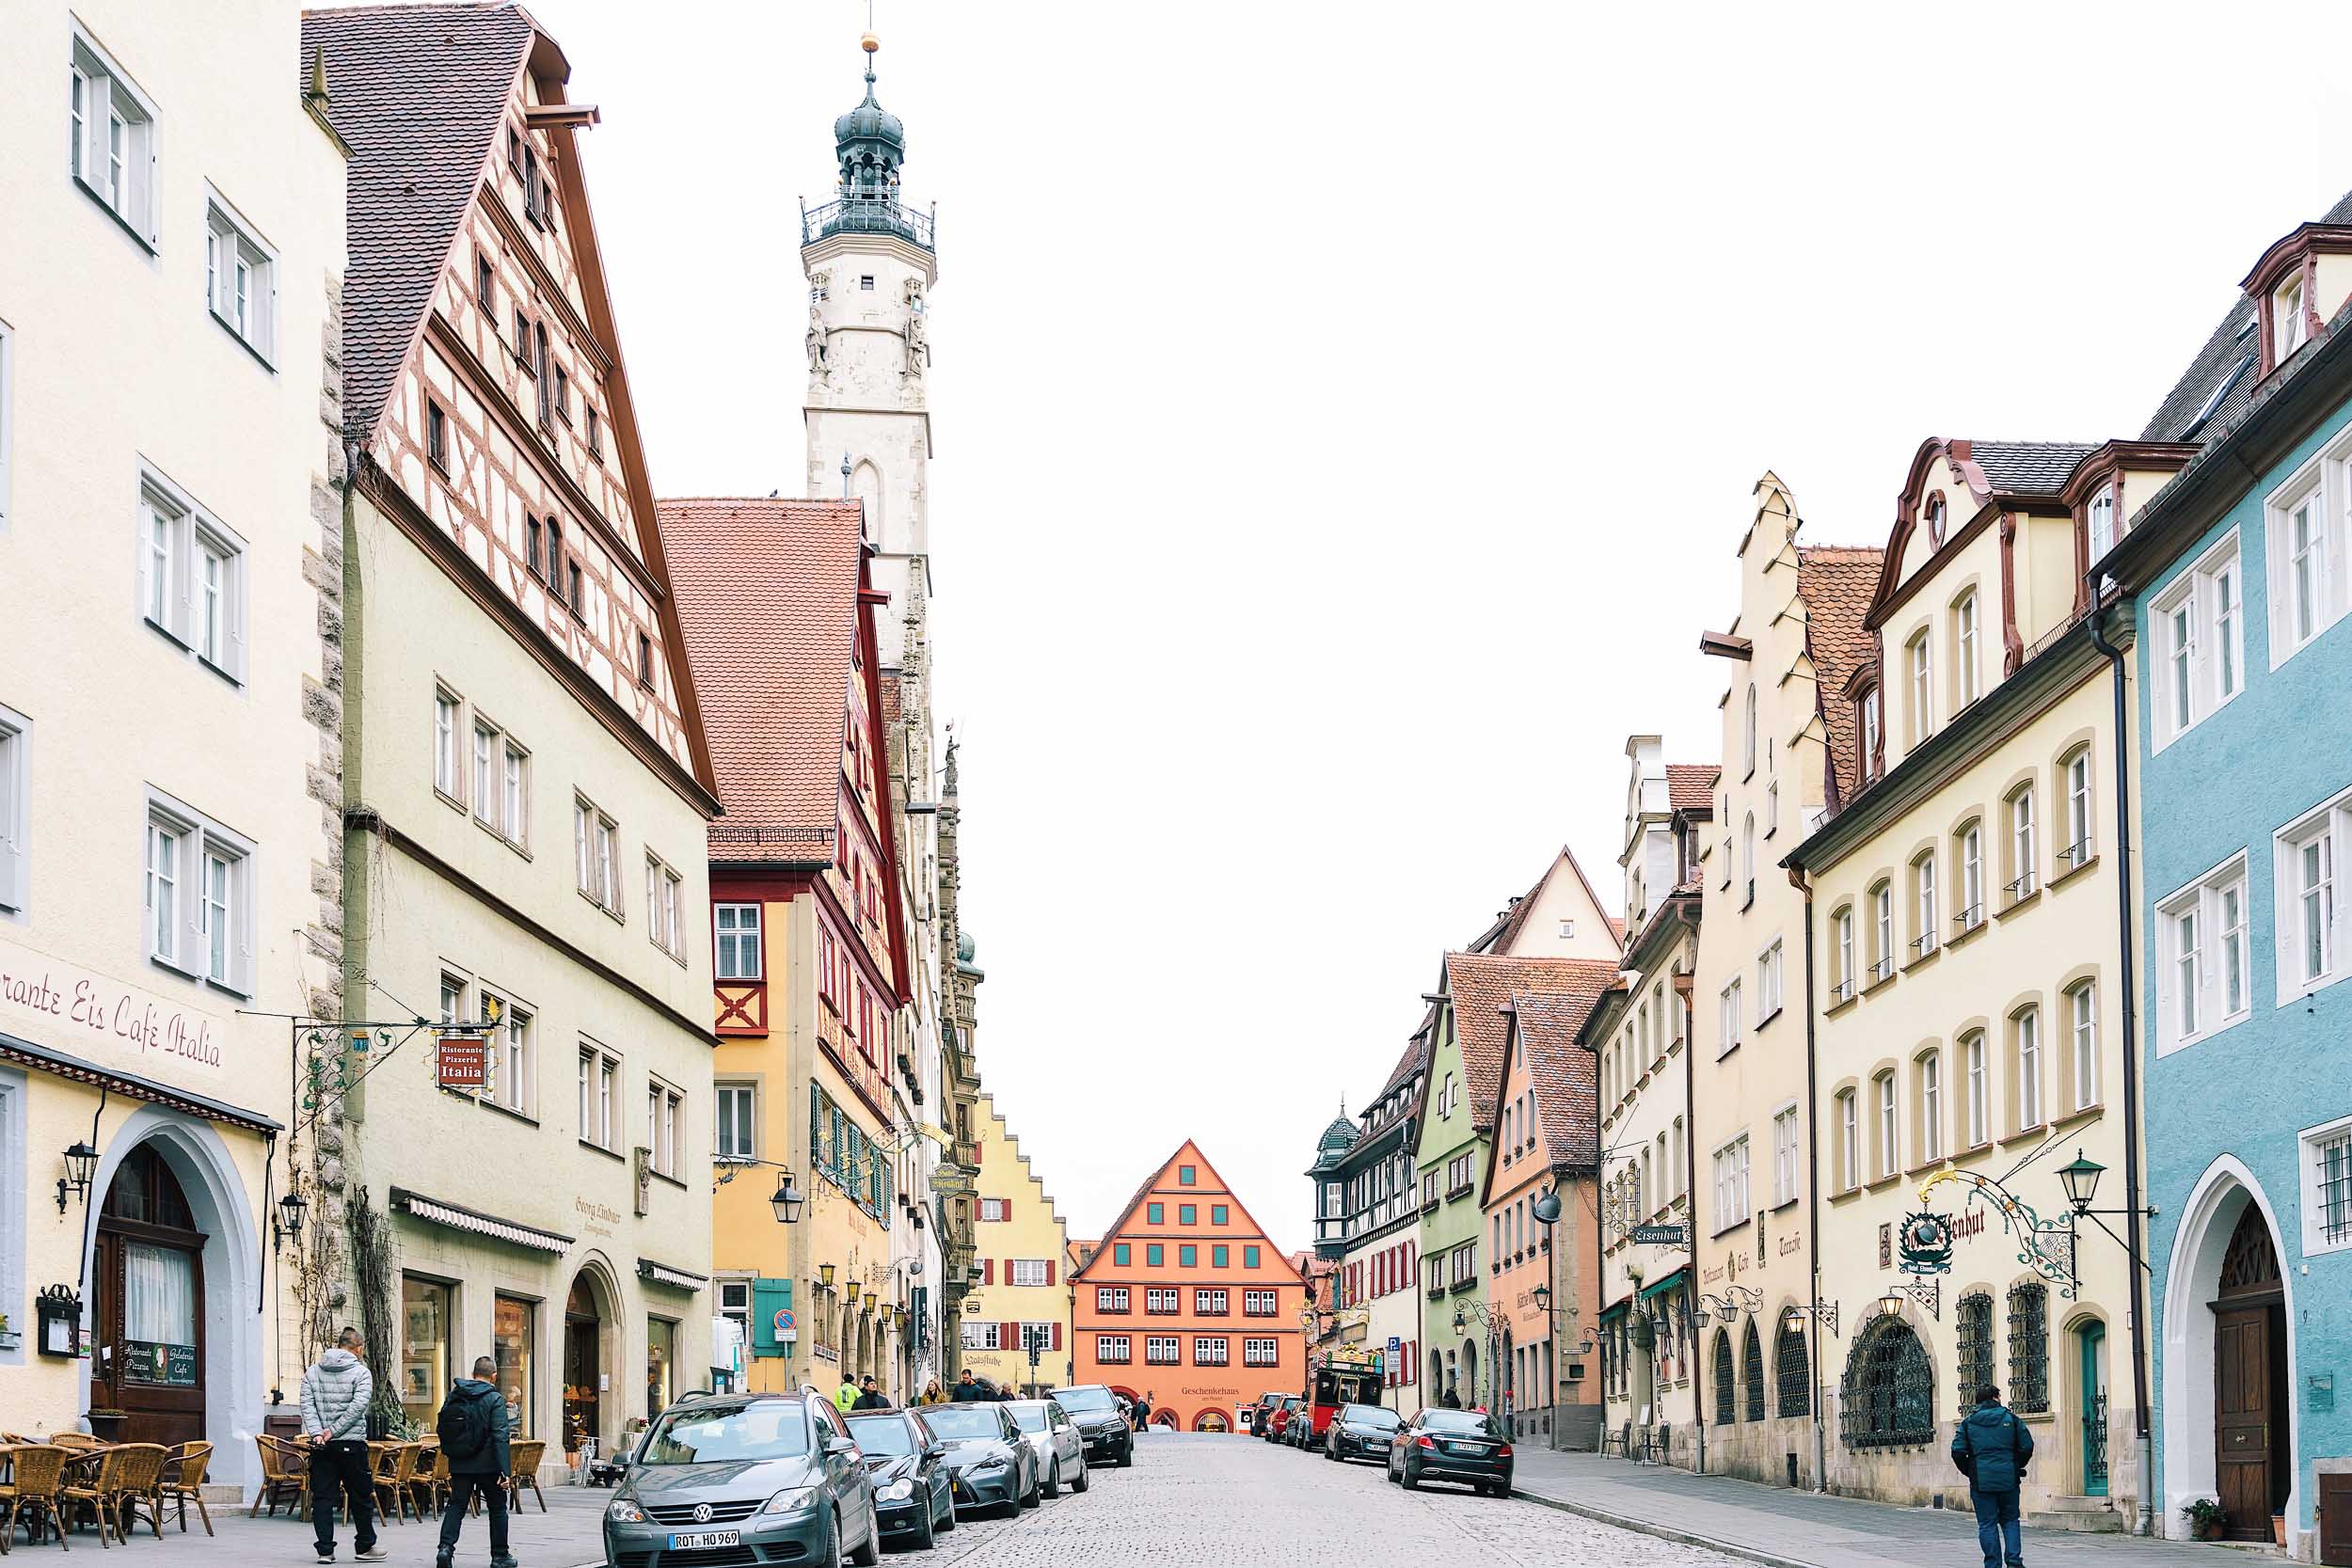 The Dreamiest Fairytale Town in Europe: Rothenburg, Germany